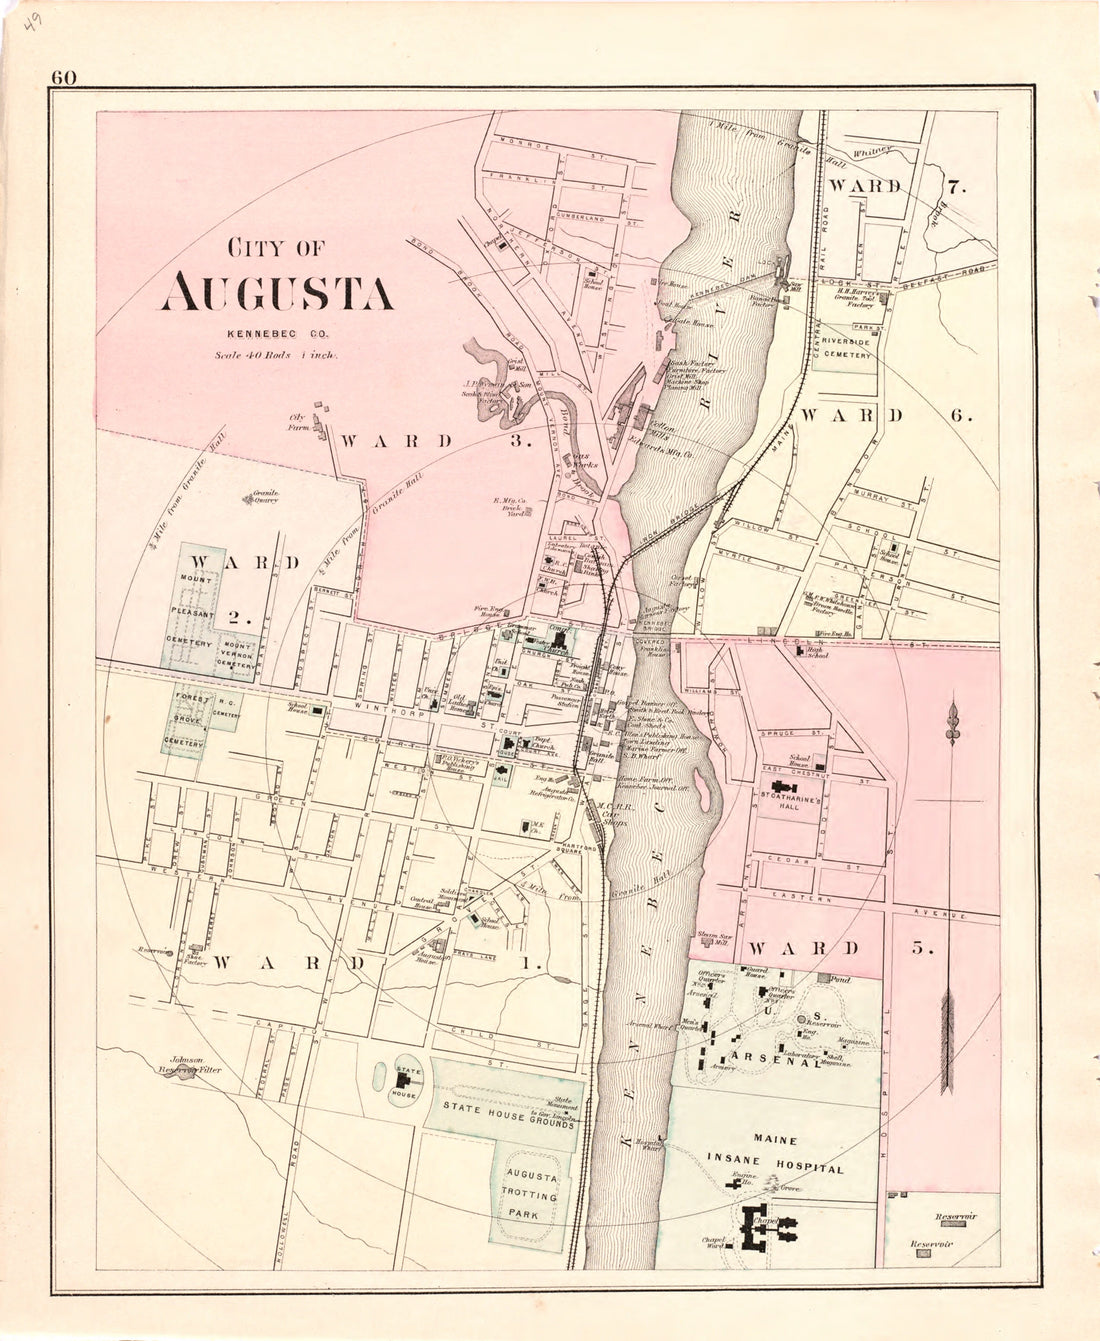 This hand drawn illustration (map) of City of Augusta from Colby&